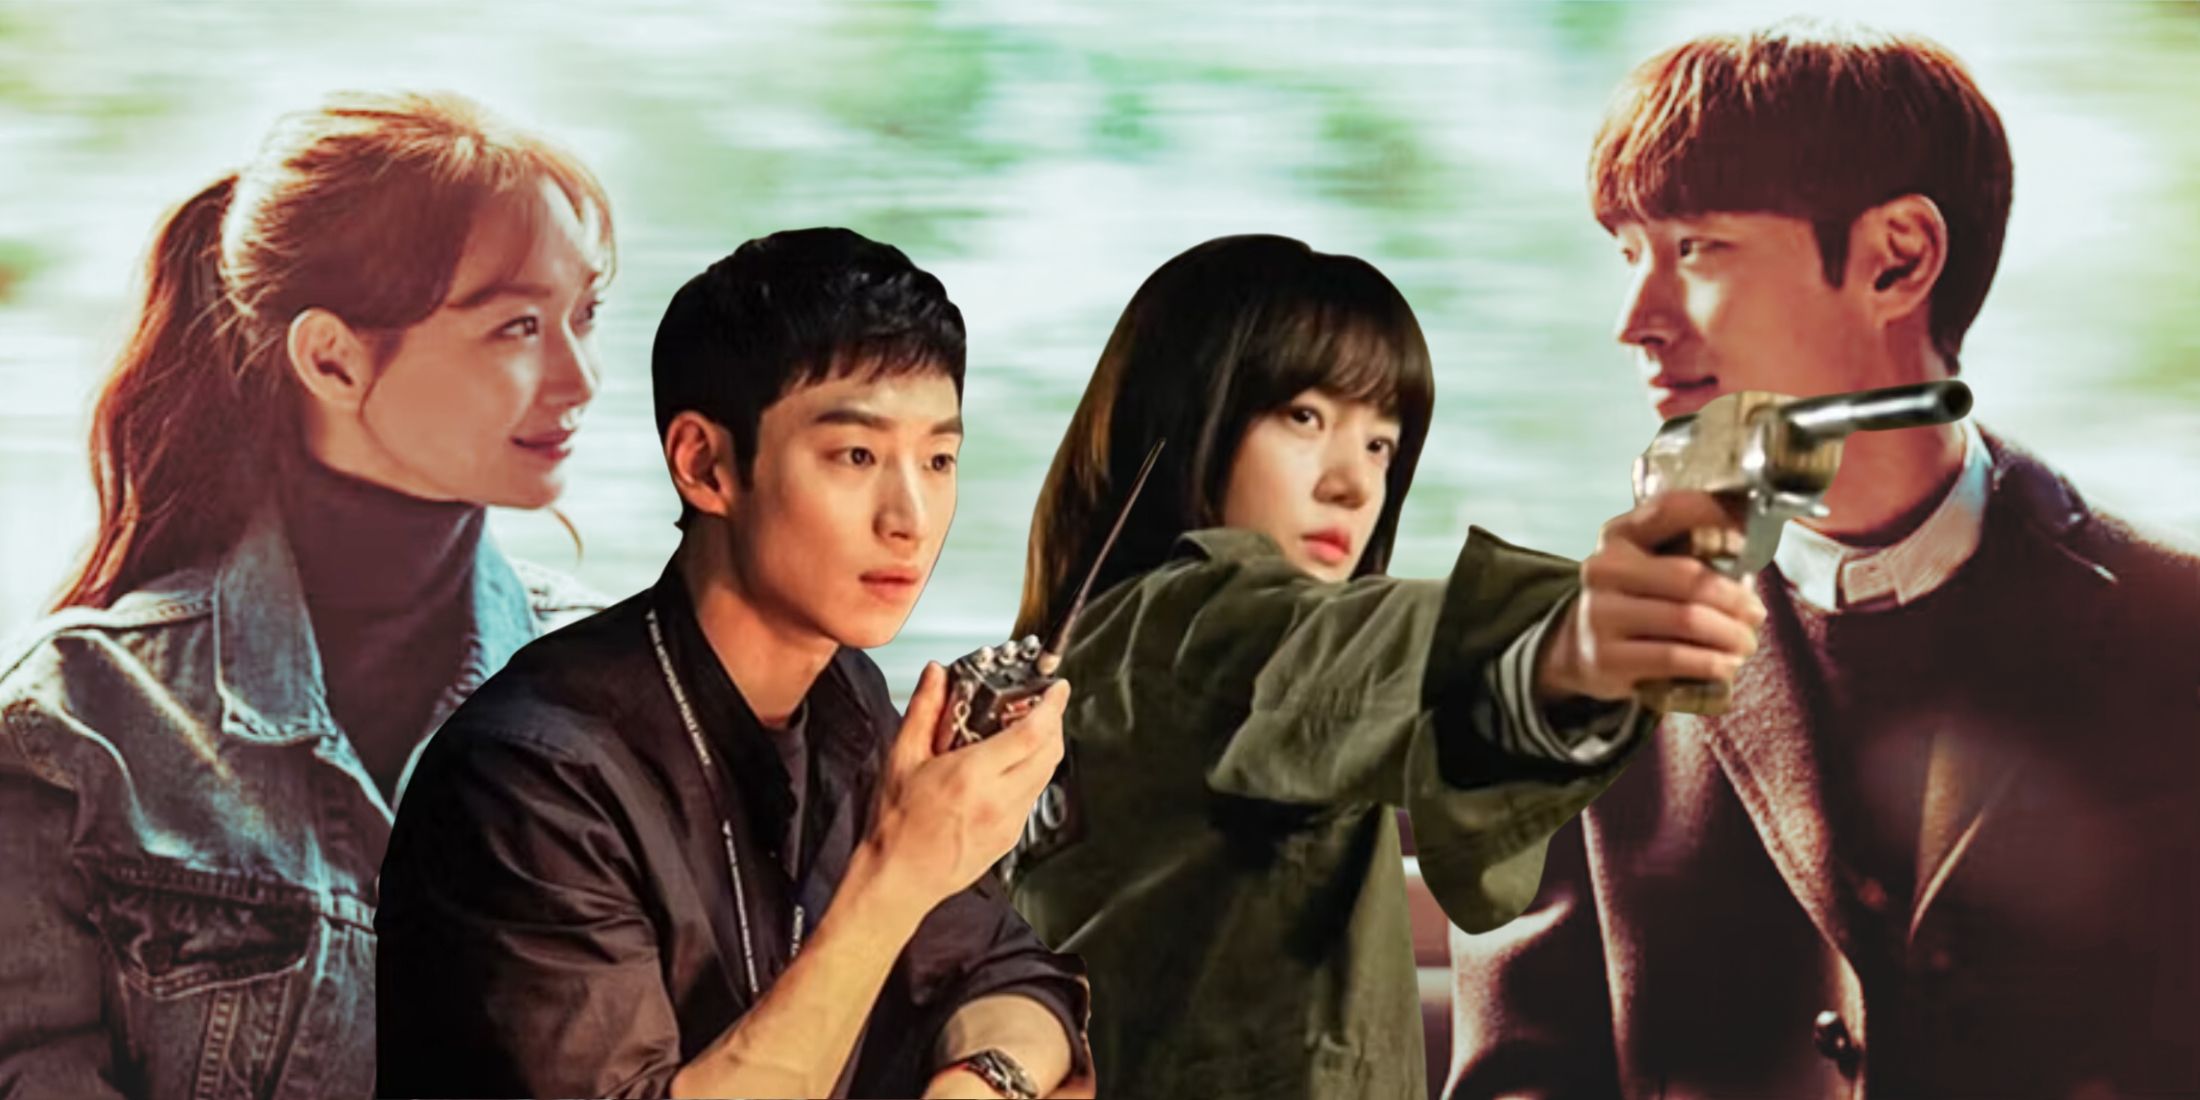 A custom image features characters from the time travel k-dramas Tomorrow With You, The Signal, and Chicago Typewriter